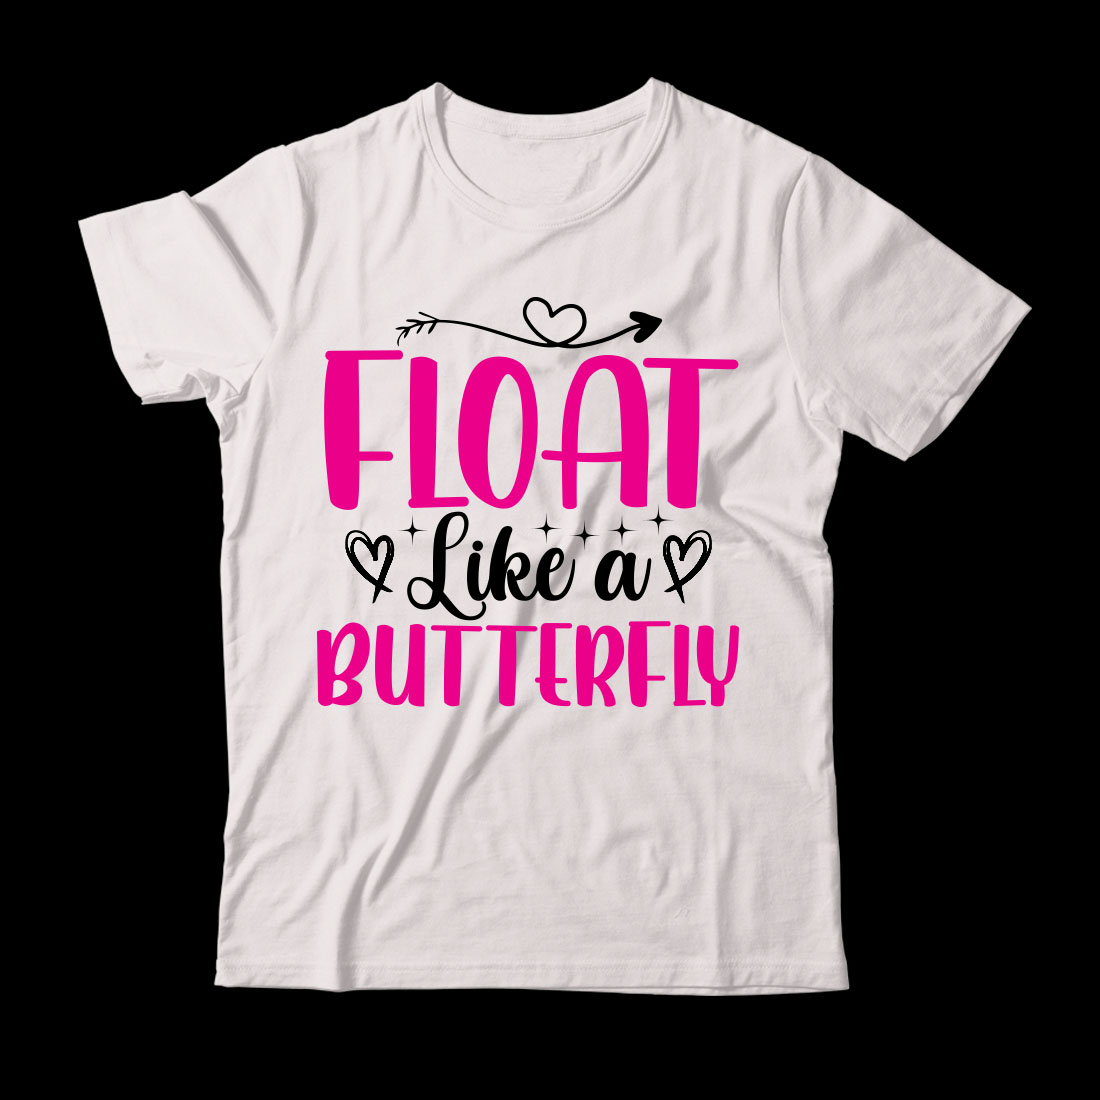 T - shirt that says float like a butterfly.